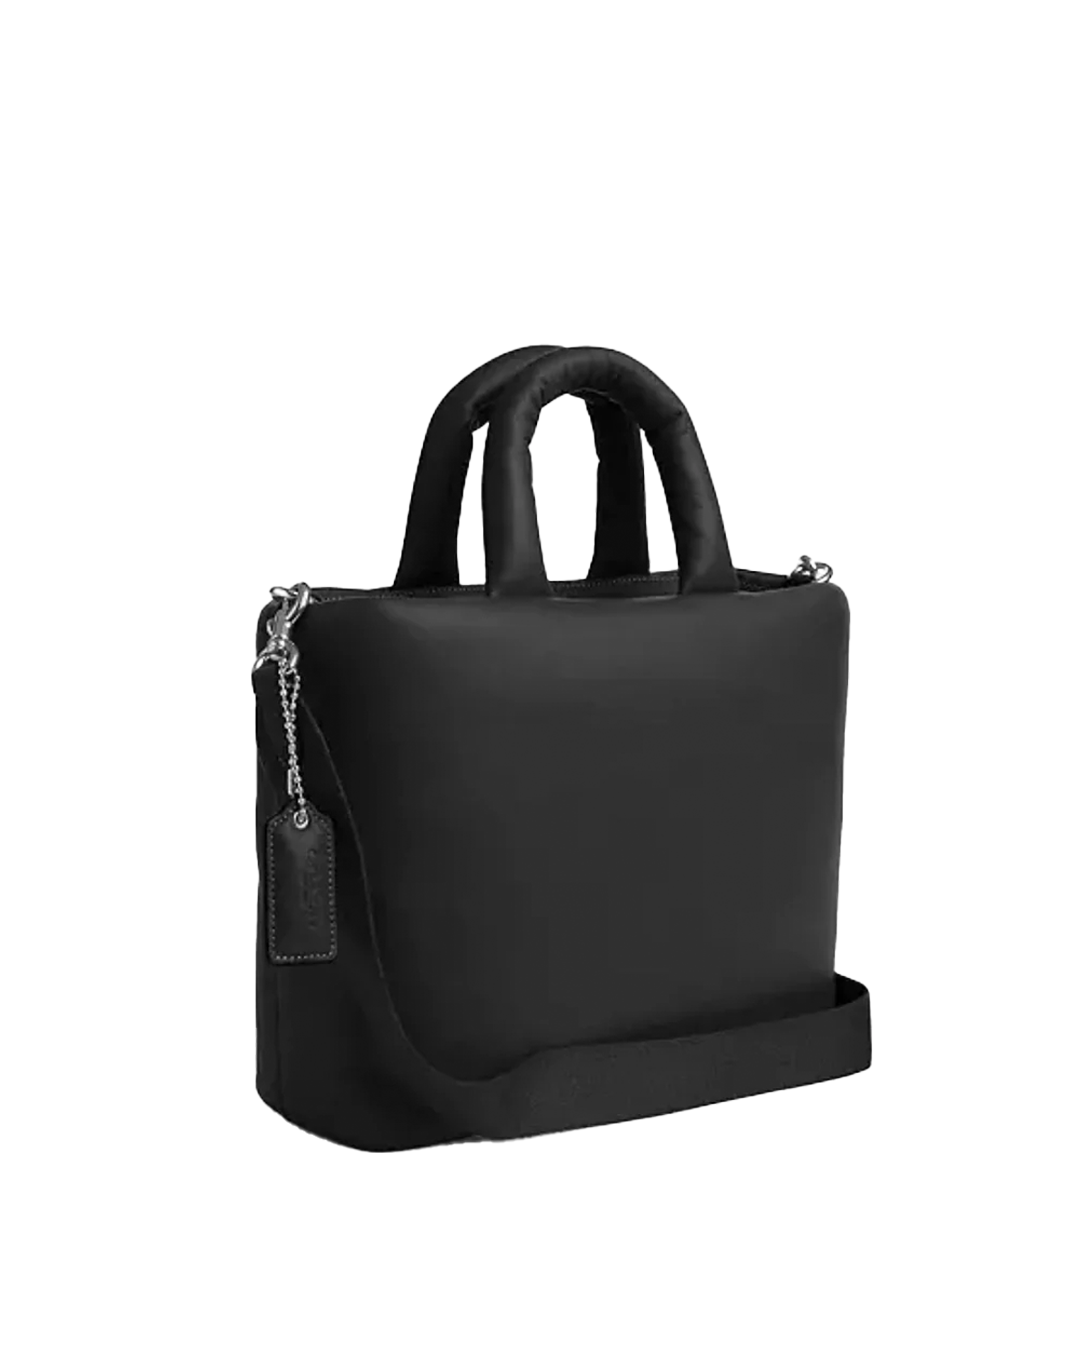 Coach Pillow Tote In Black